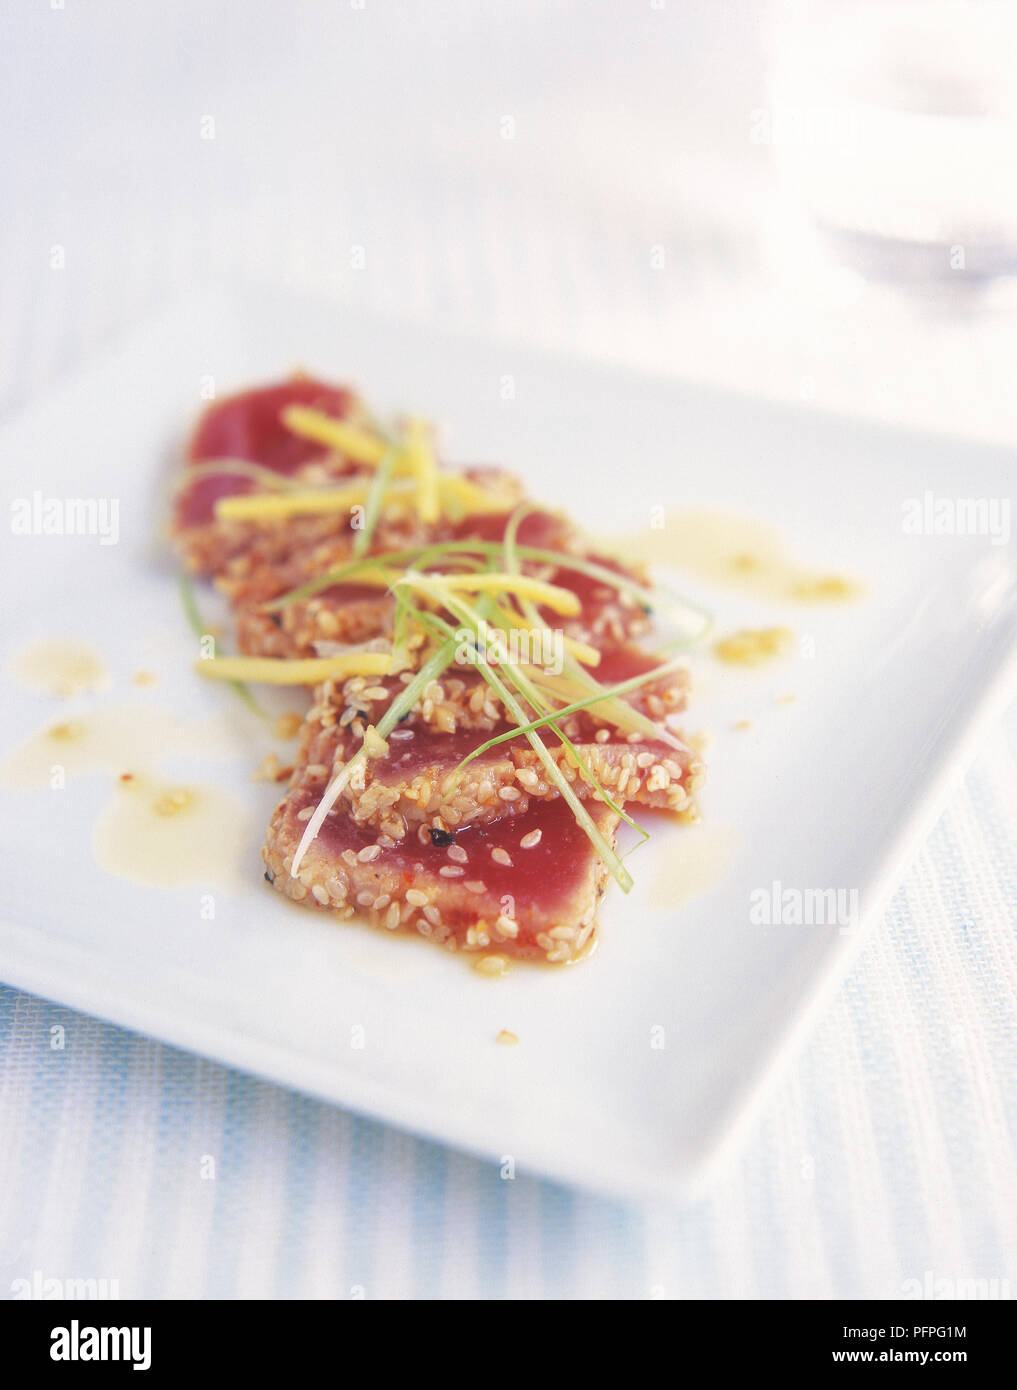 Chilled seared tuna with ginger and spring onion dressing (Katsuo tataki) sprinkled with sesame seeds on white plate, close-up Stock Photo